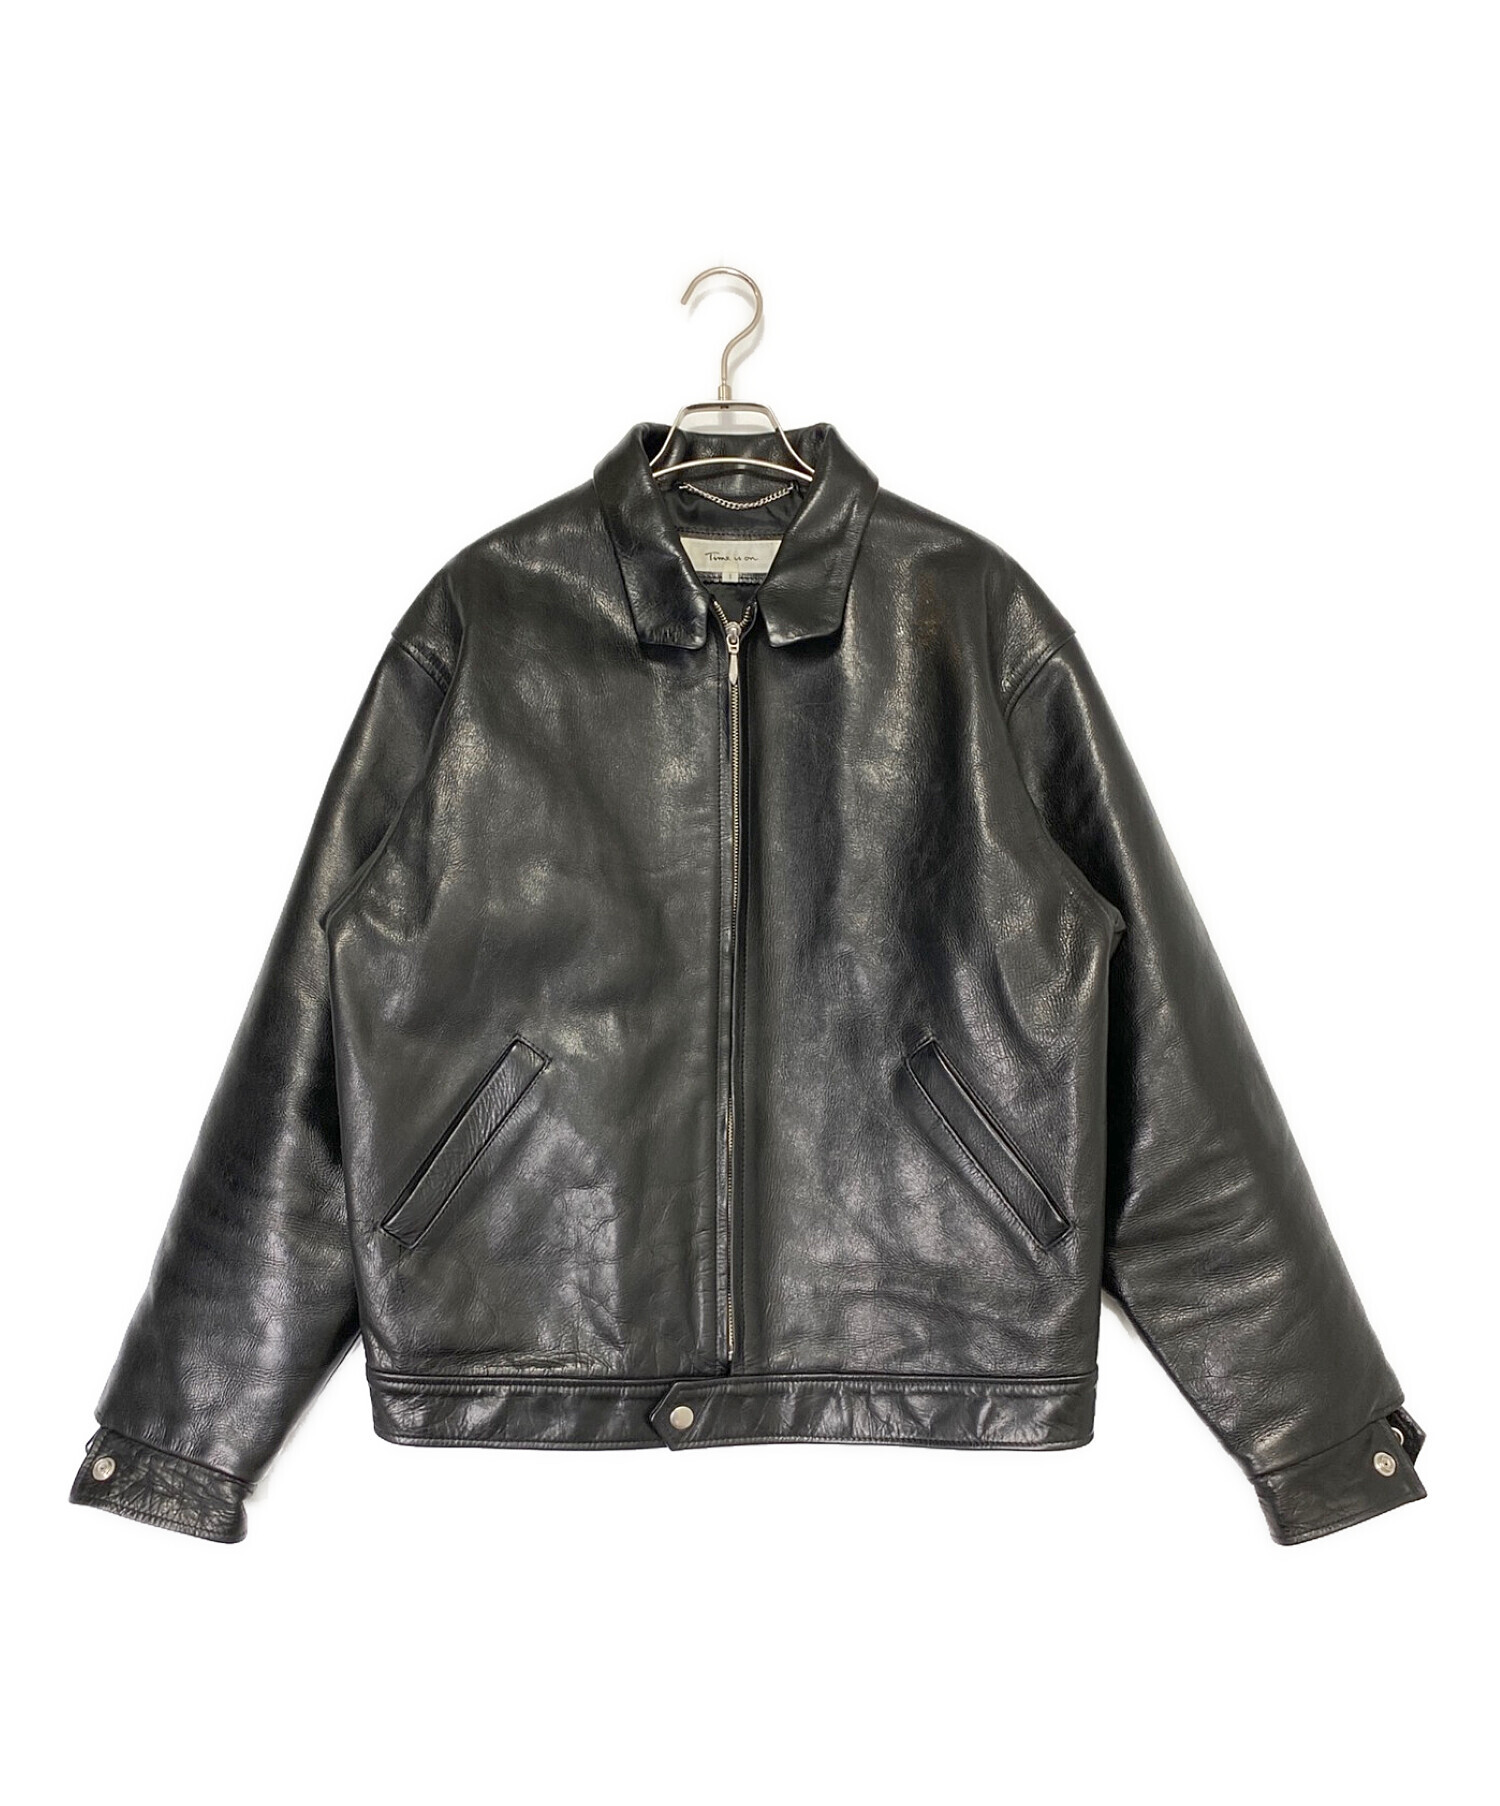 ZIA'S LEATHER JKT time is on